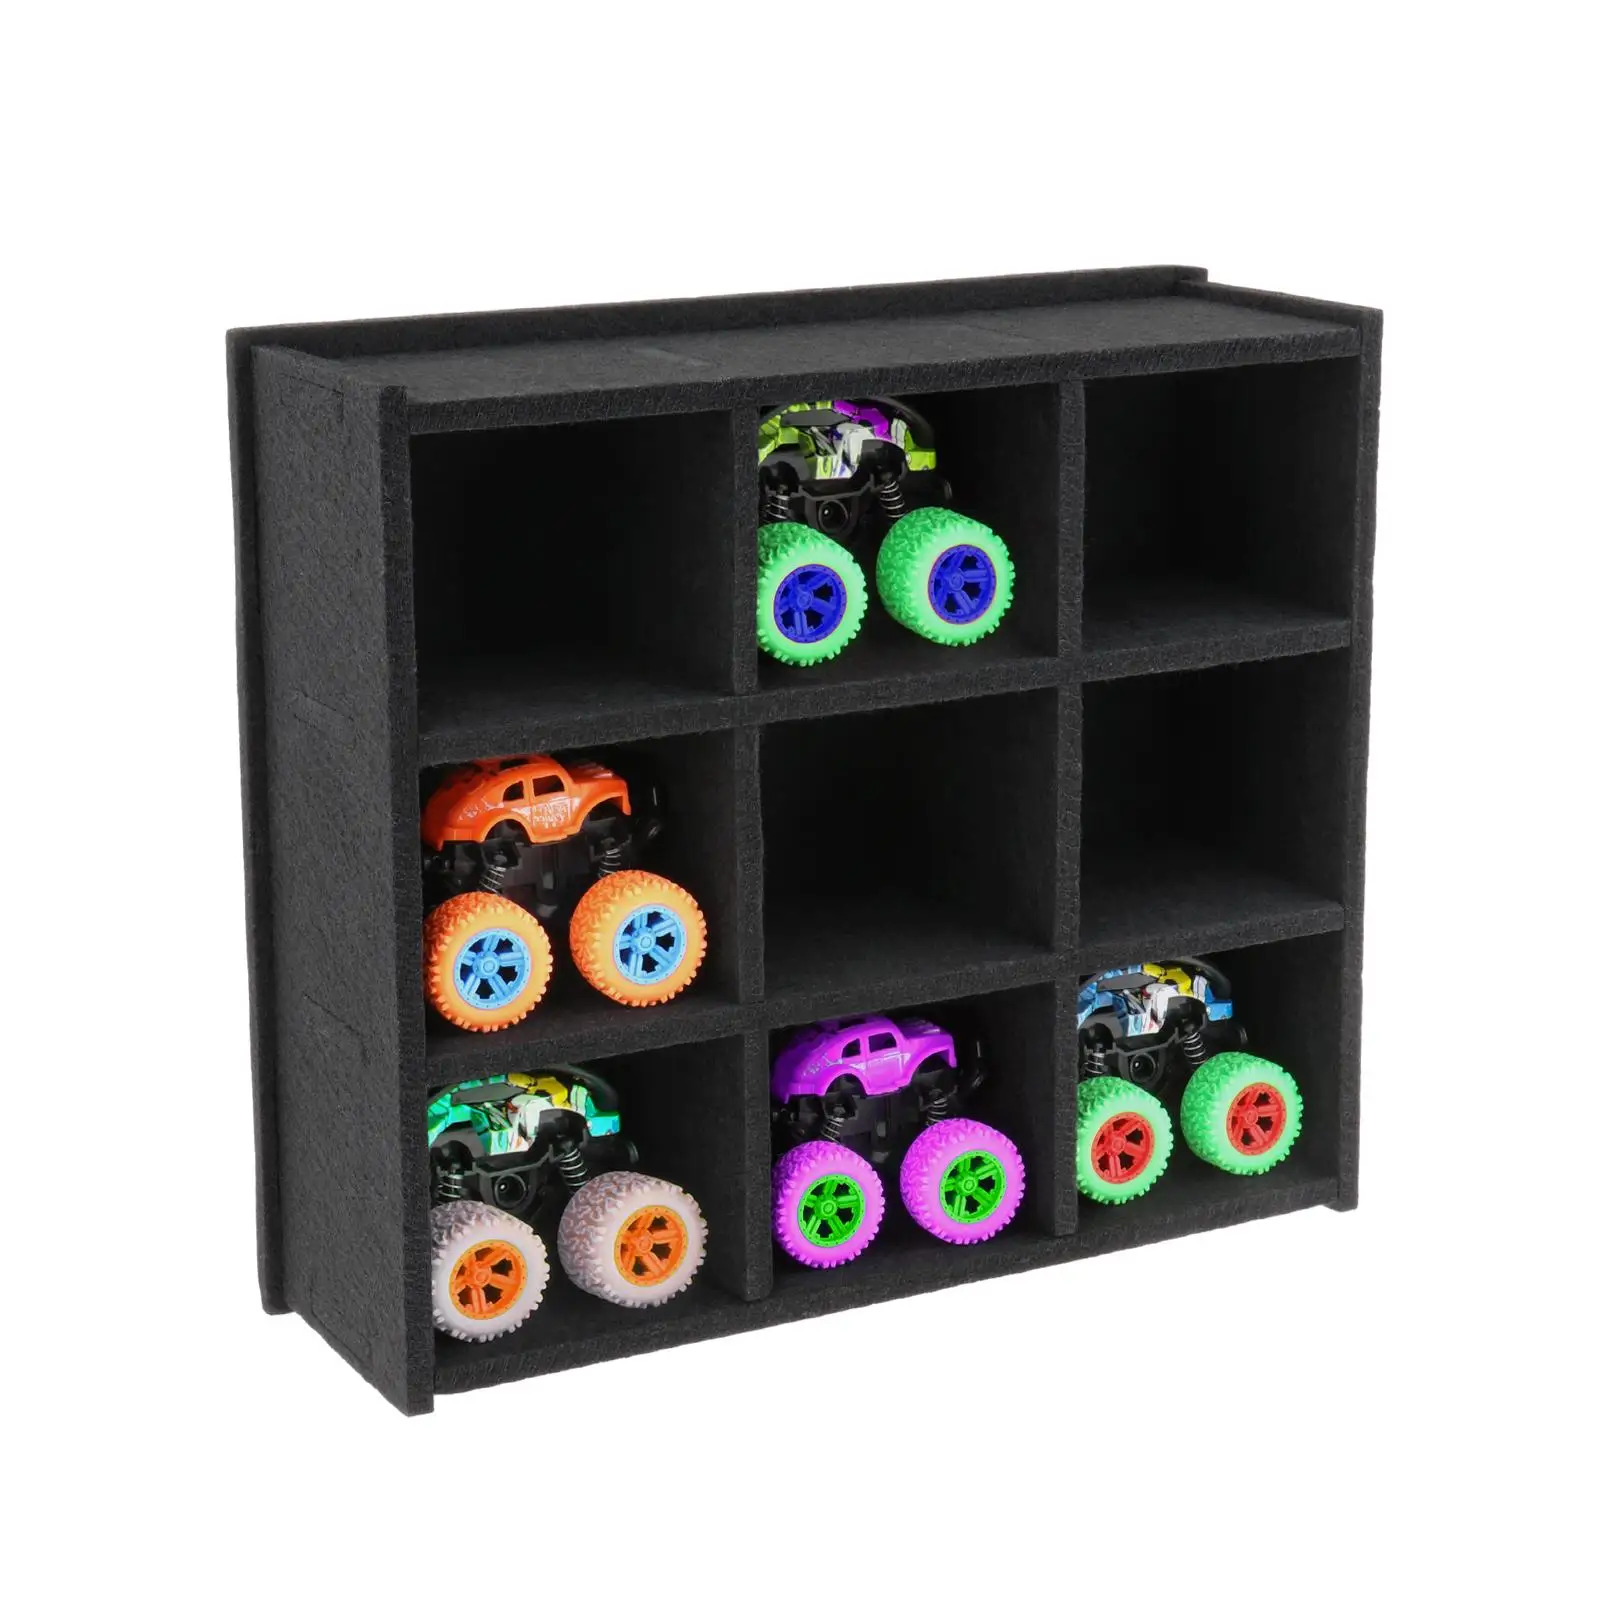 Monster Trucks Toy Wall Mounted Display Case with 9 Slots DIY Assembled Felt Material for Displaying Multifunctional Accessories